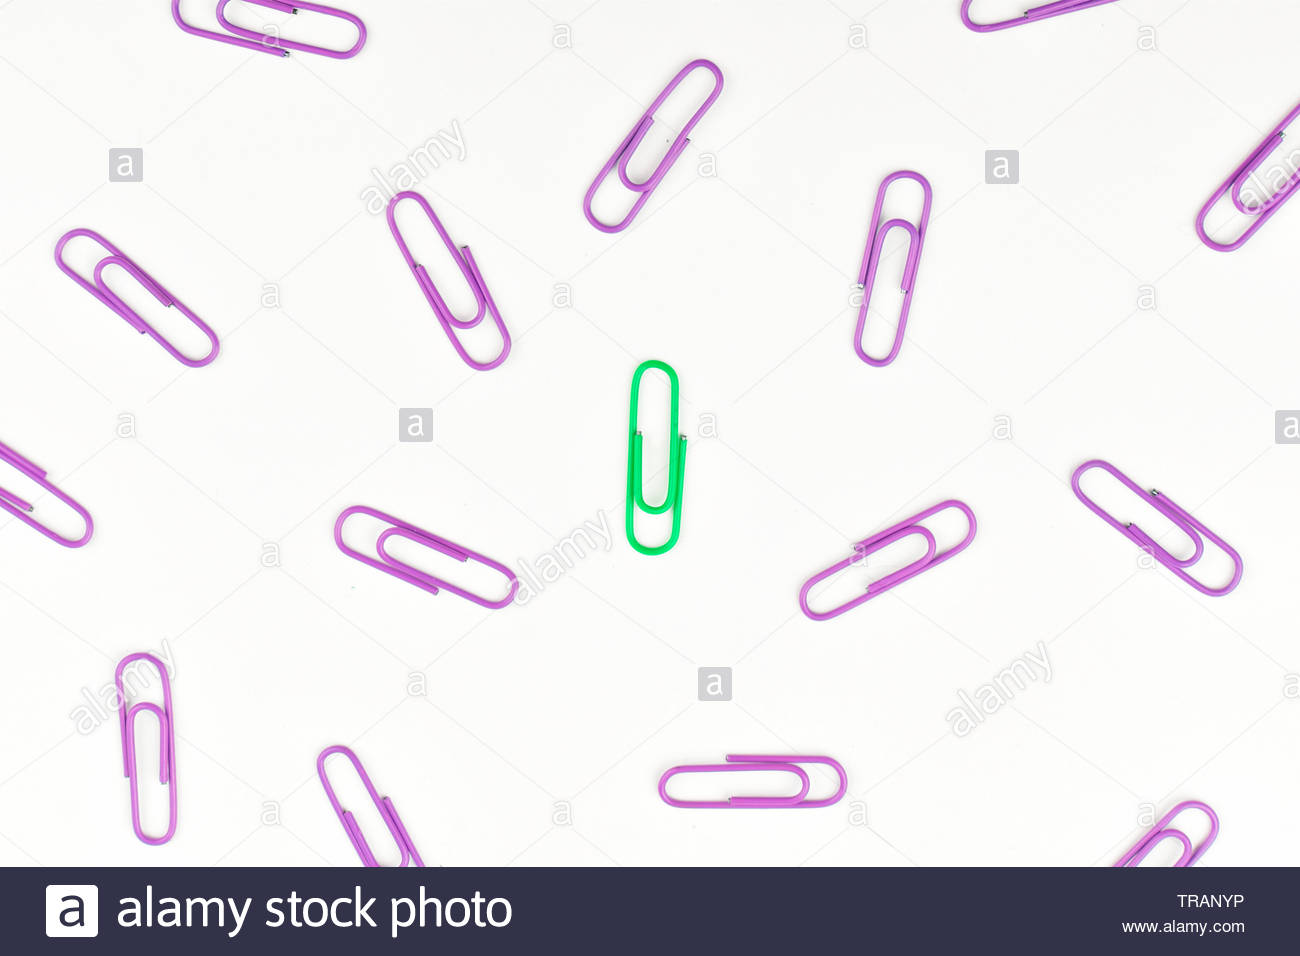 Business Concept As A Group Of Paperclip On White Background With